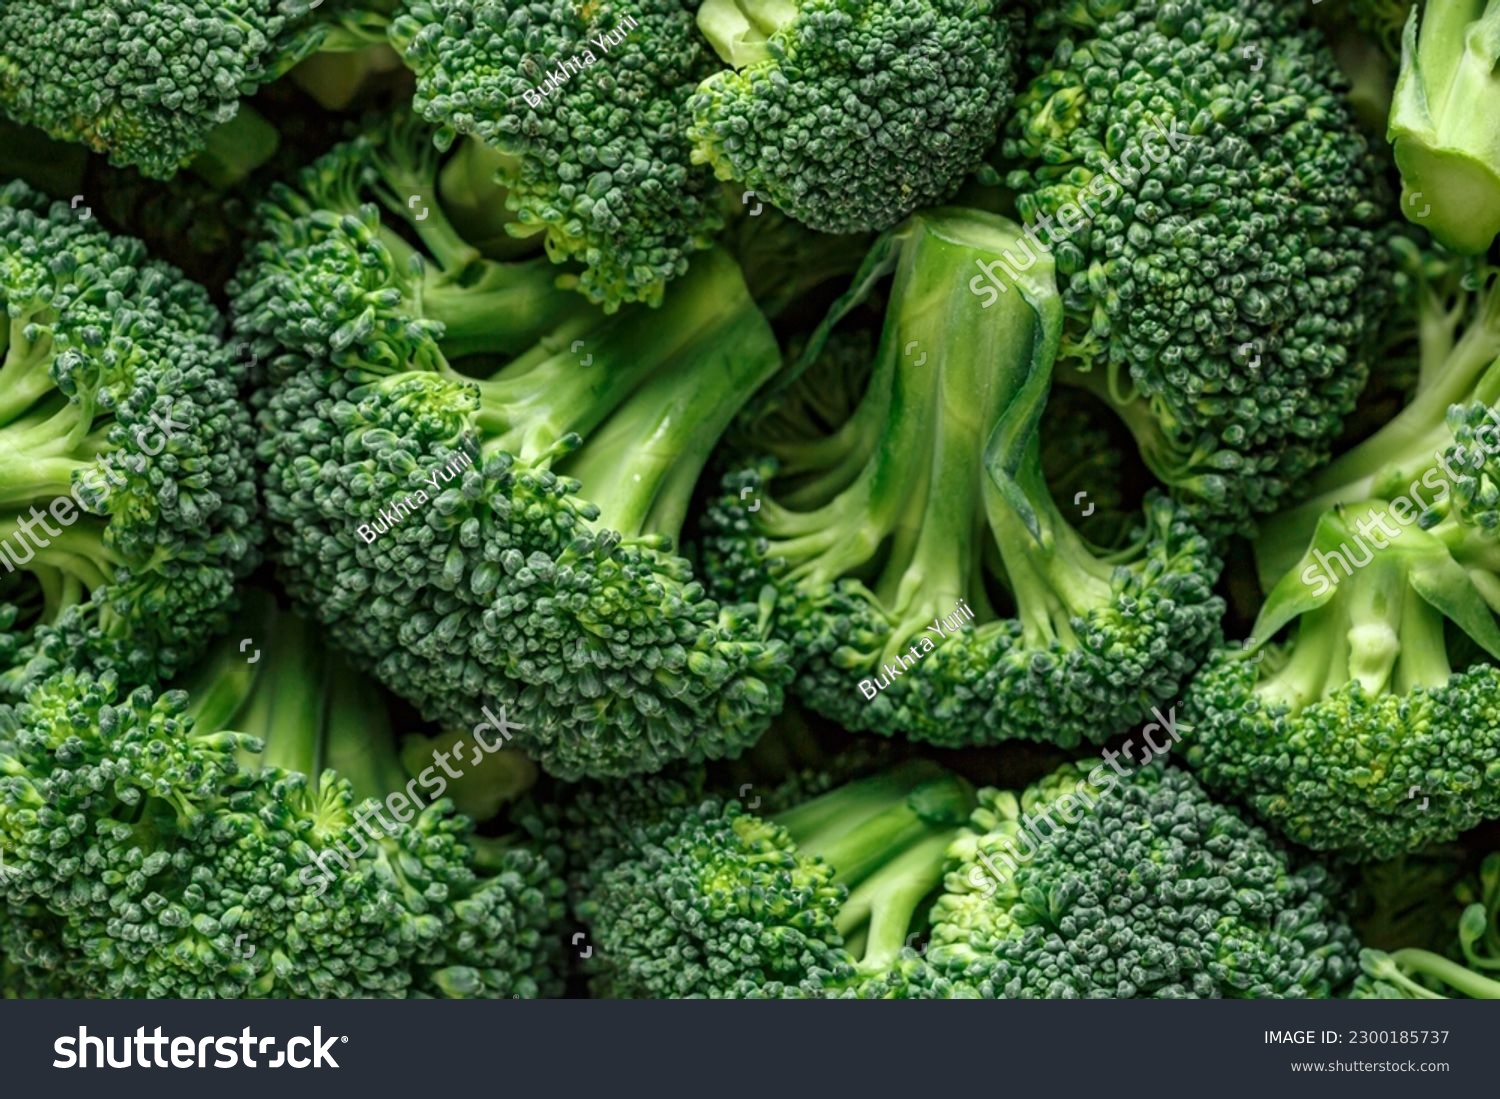 Macro photo green fresh vegetable broccoli. Fresh green broccoli on a black stone table.Broccoli vegetable is full of vitamin.Vegetables for diet and healthy eating.Organic food. #2300185737